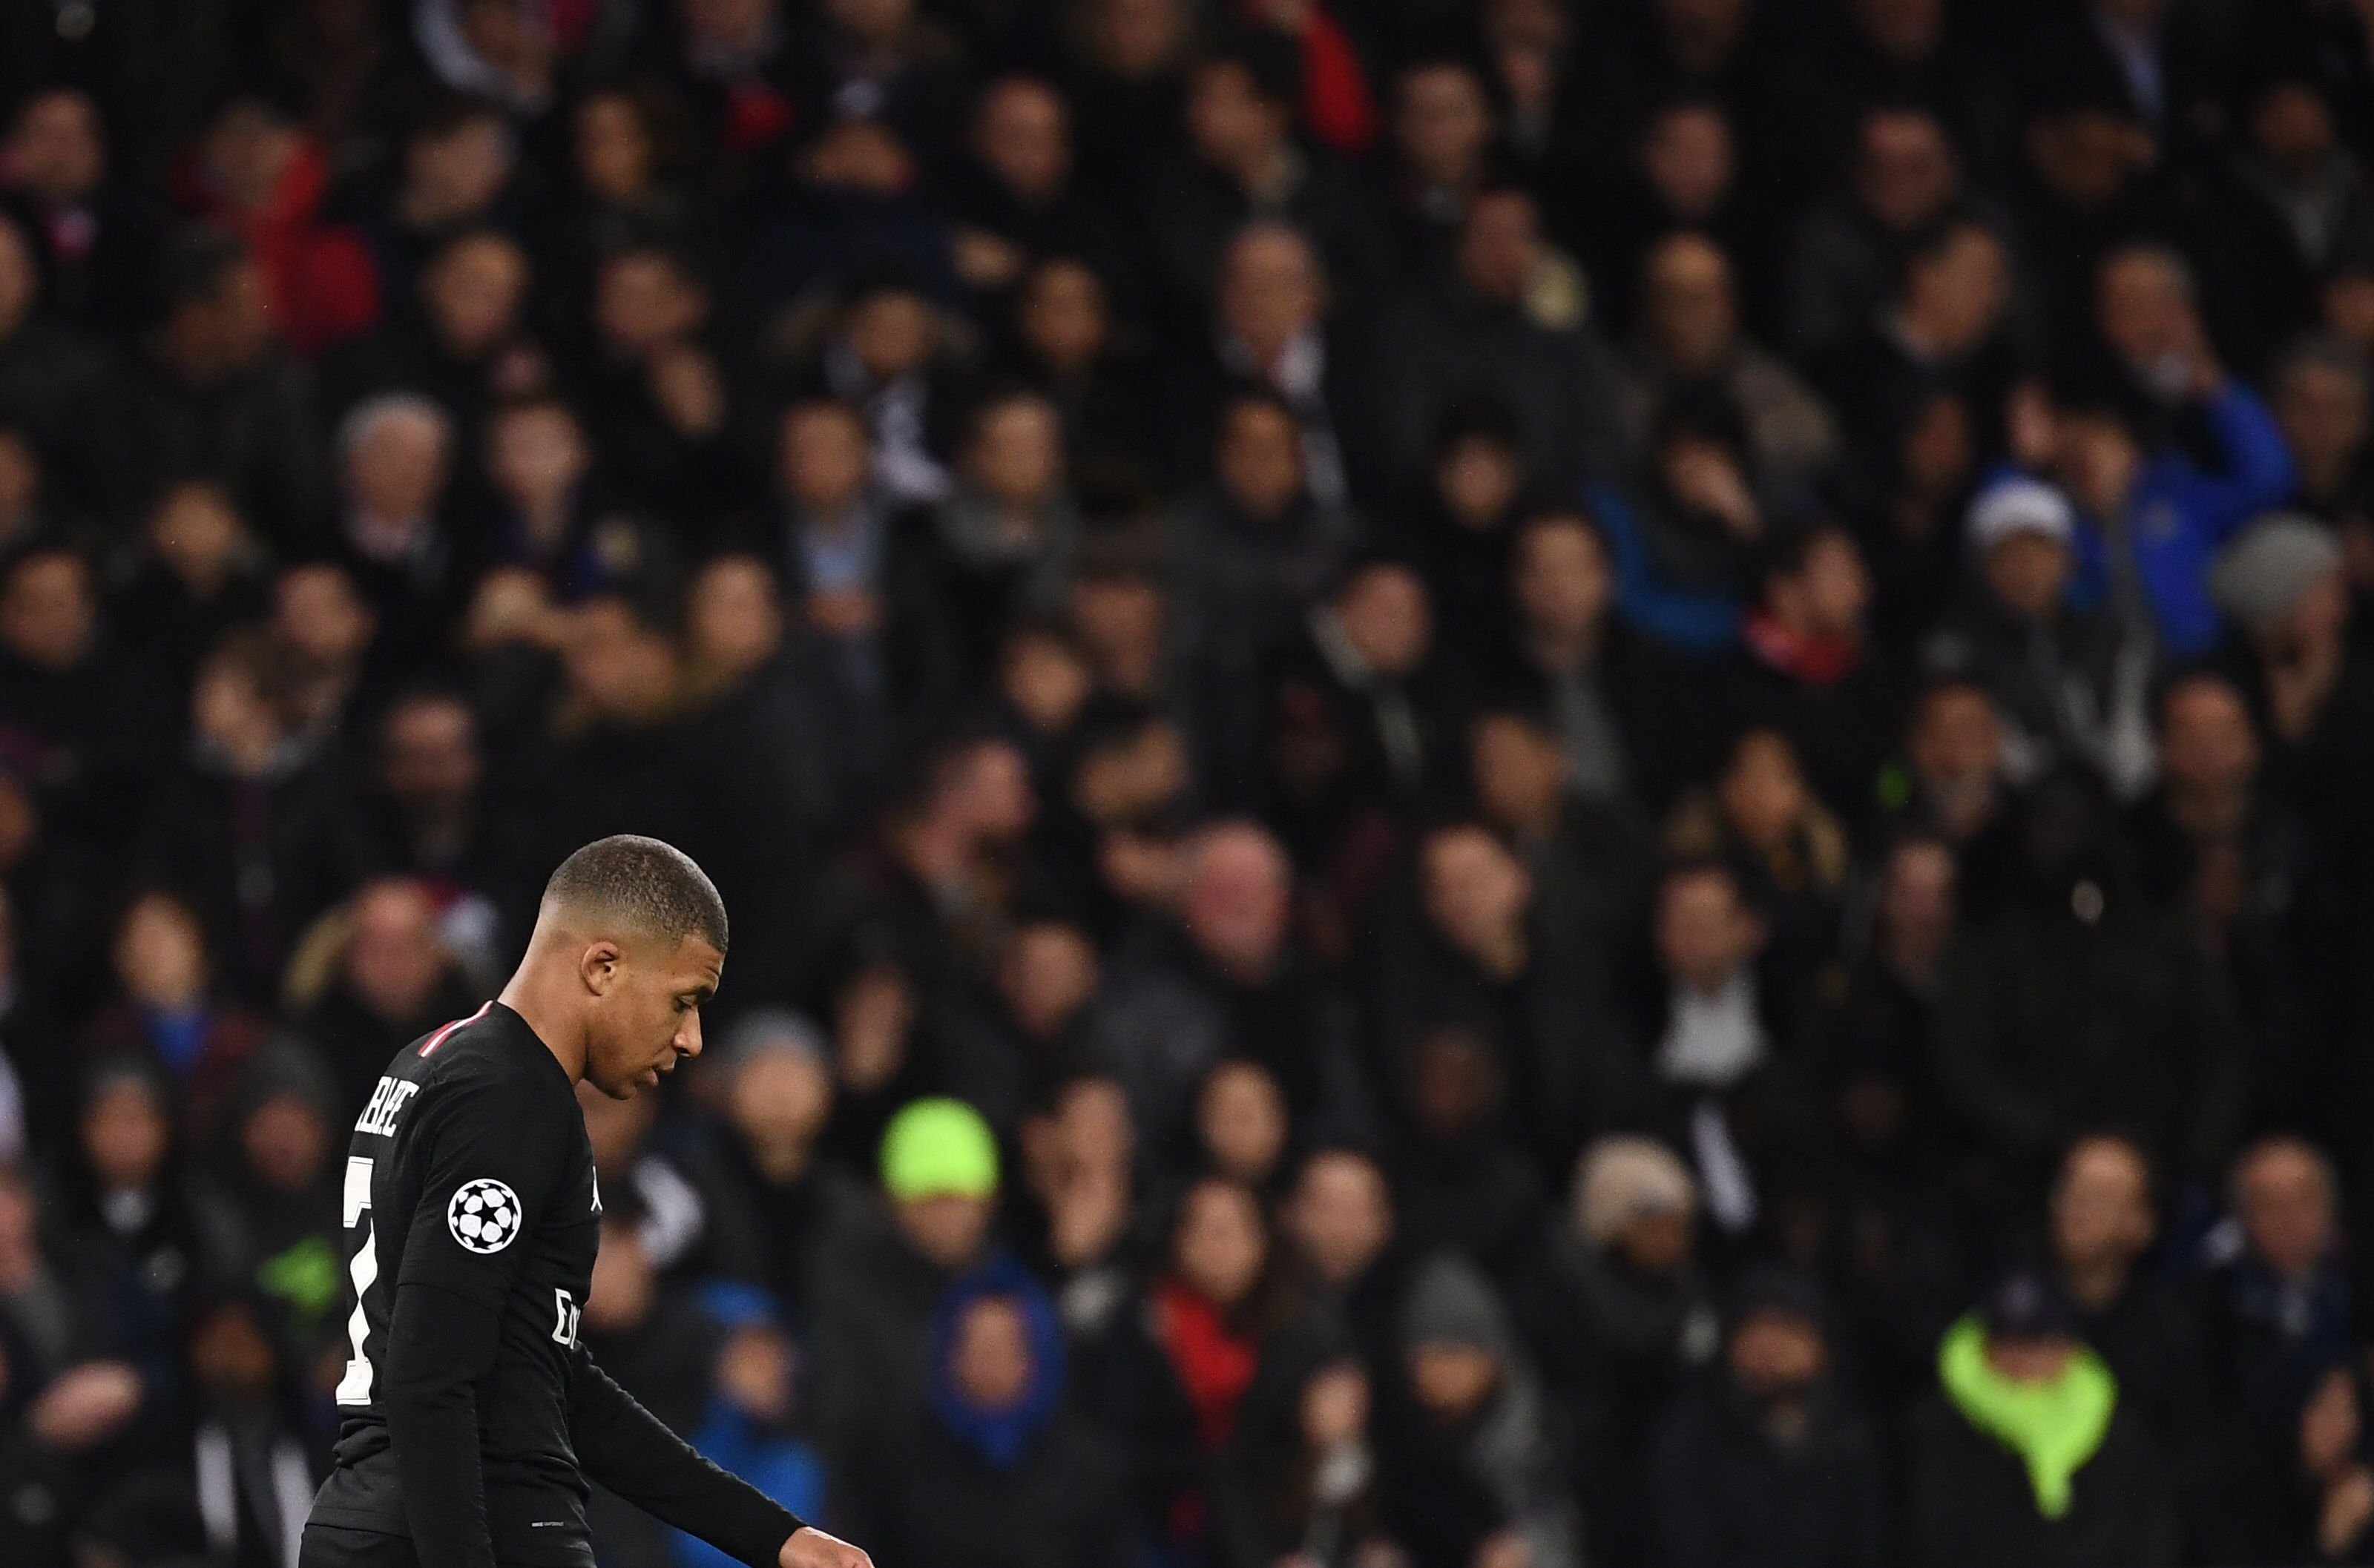 TOPSHOT - Paris Saint-Germain's French forward Kylian Mbappe (L) looks on during the UEFA Champions League round of 16 second-leg football match between Paris Saint-Germain (PSG) and Manchester United at the Parc des Princes stadium in Paris on March 6, 2019. (Photo by FRANCK FIFE / AFP) (Photo credit should read FRANCK FIFE/AFP/Getty Images)